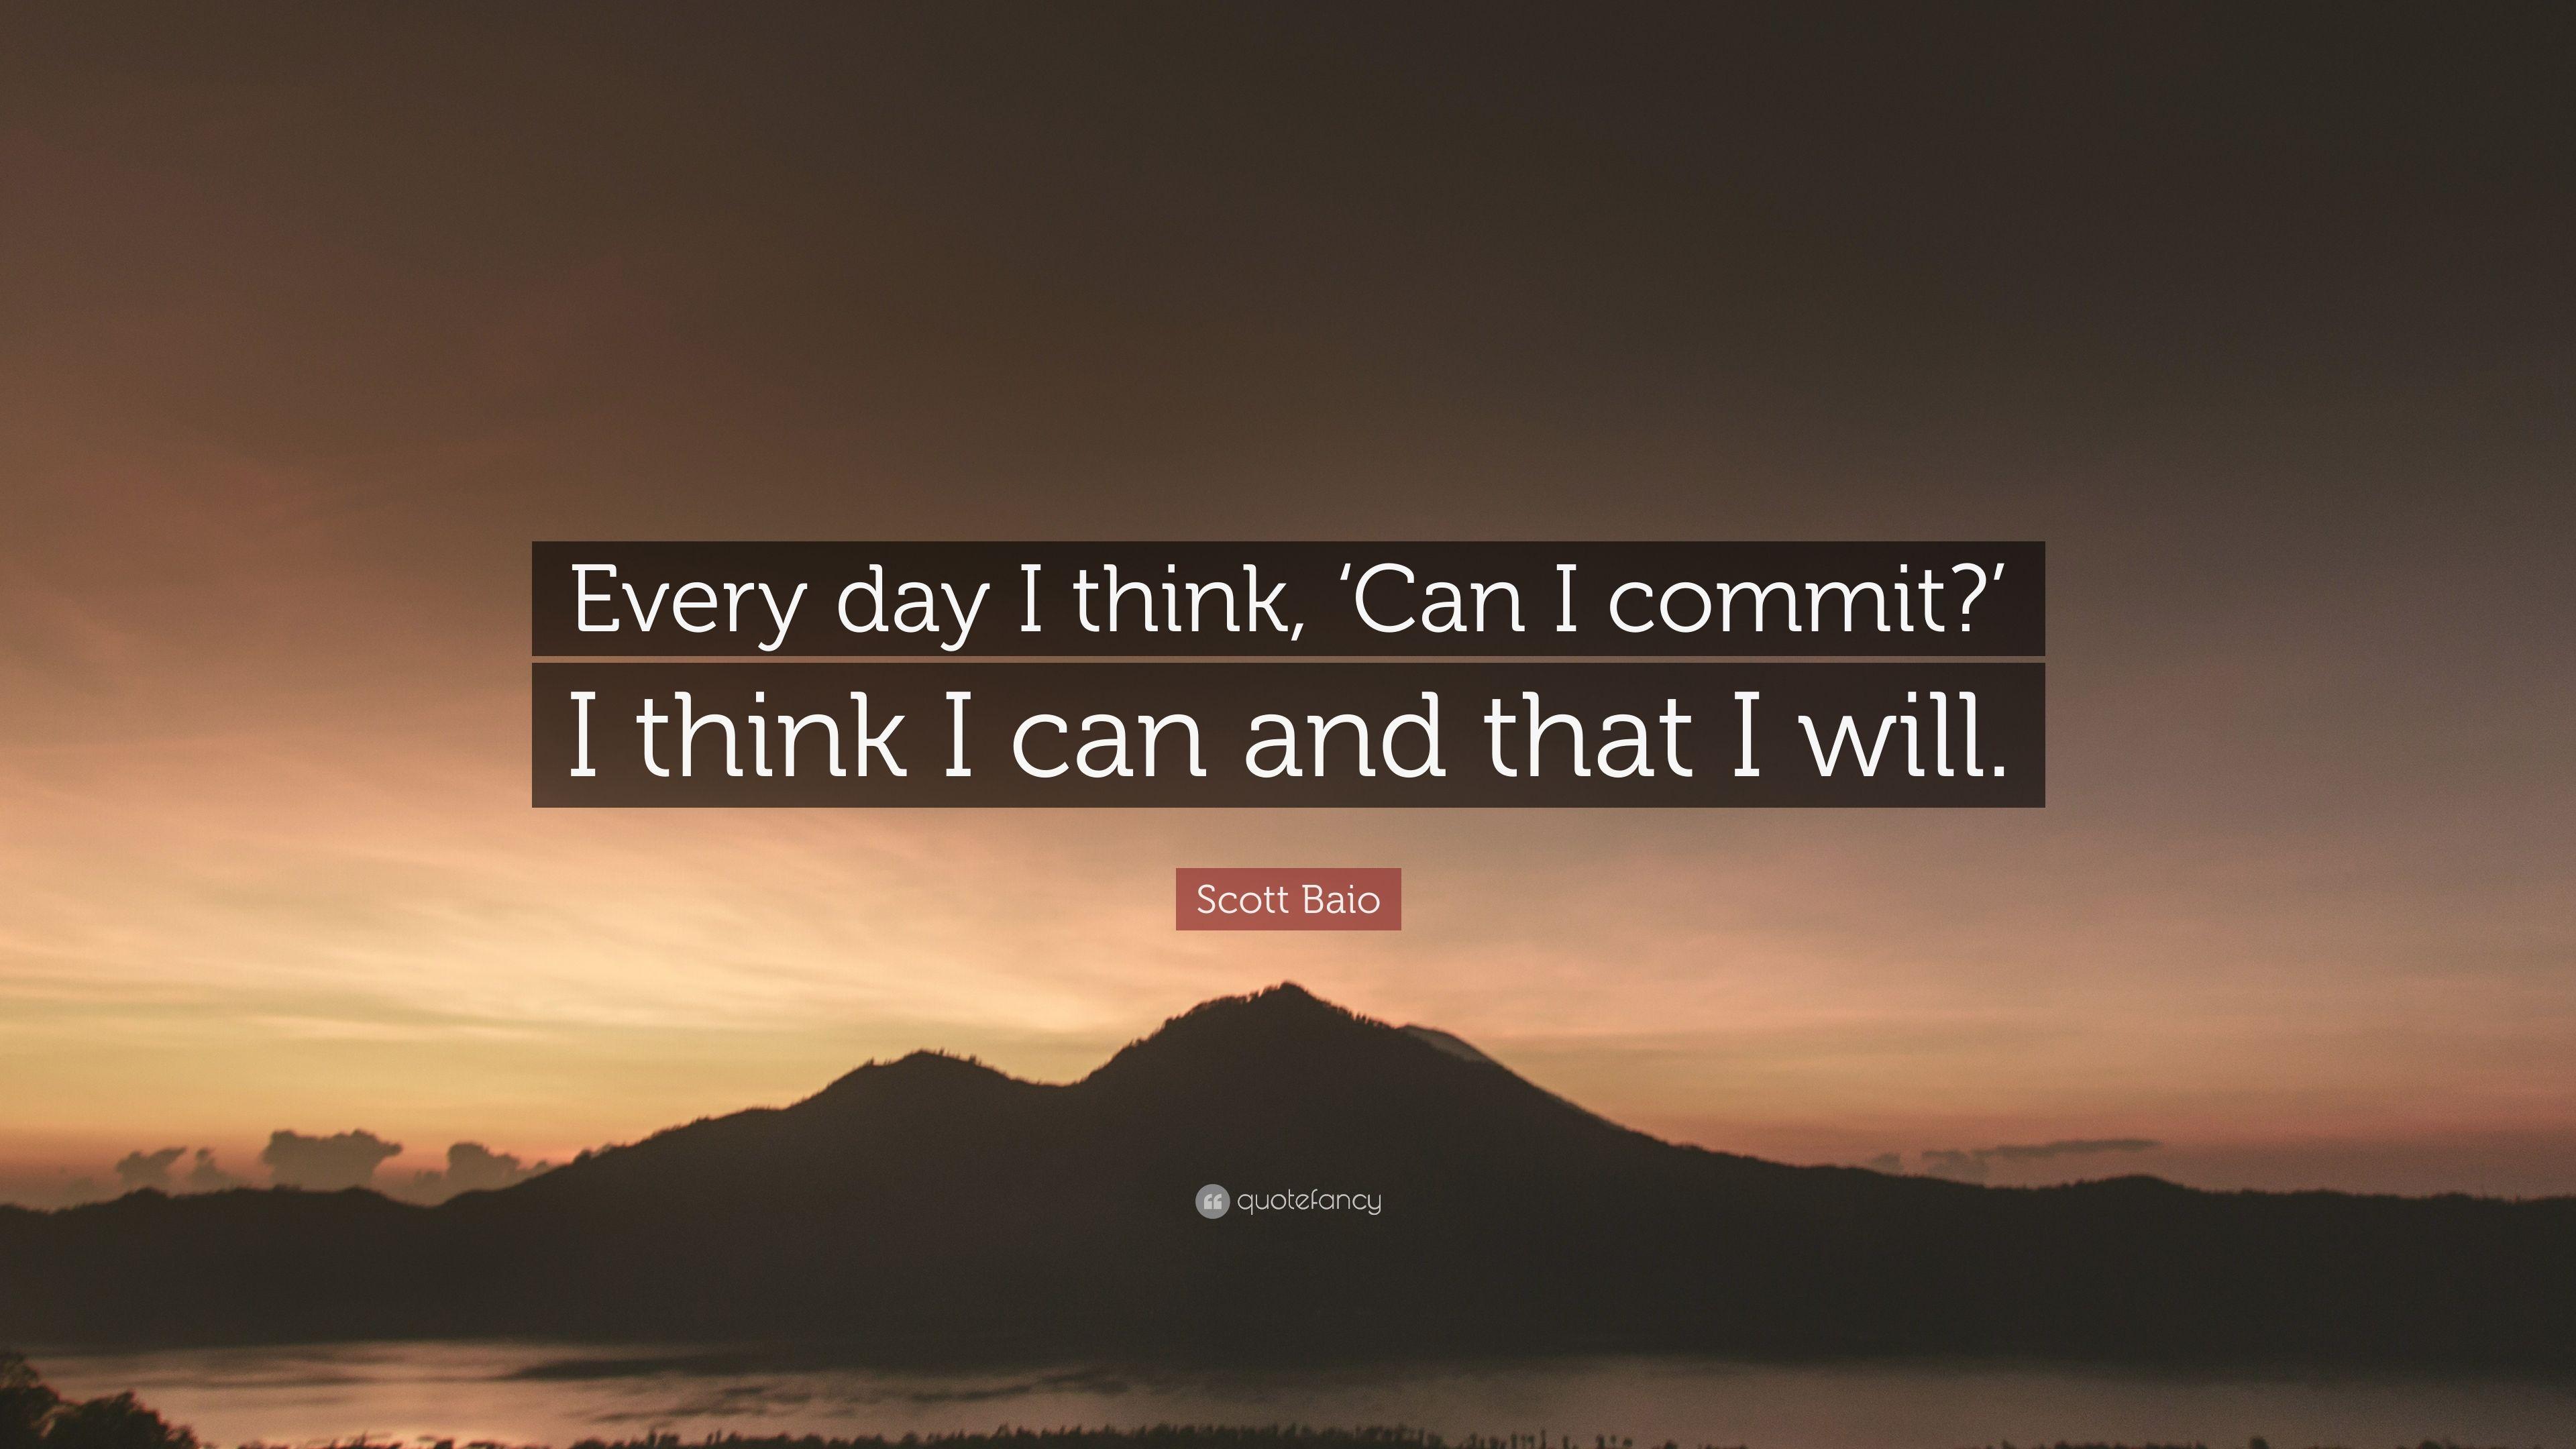 Scott Baio Quote: “Every day I think, 'Can I commit?' I think I